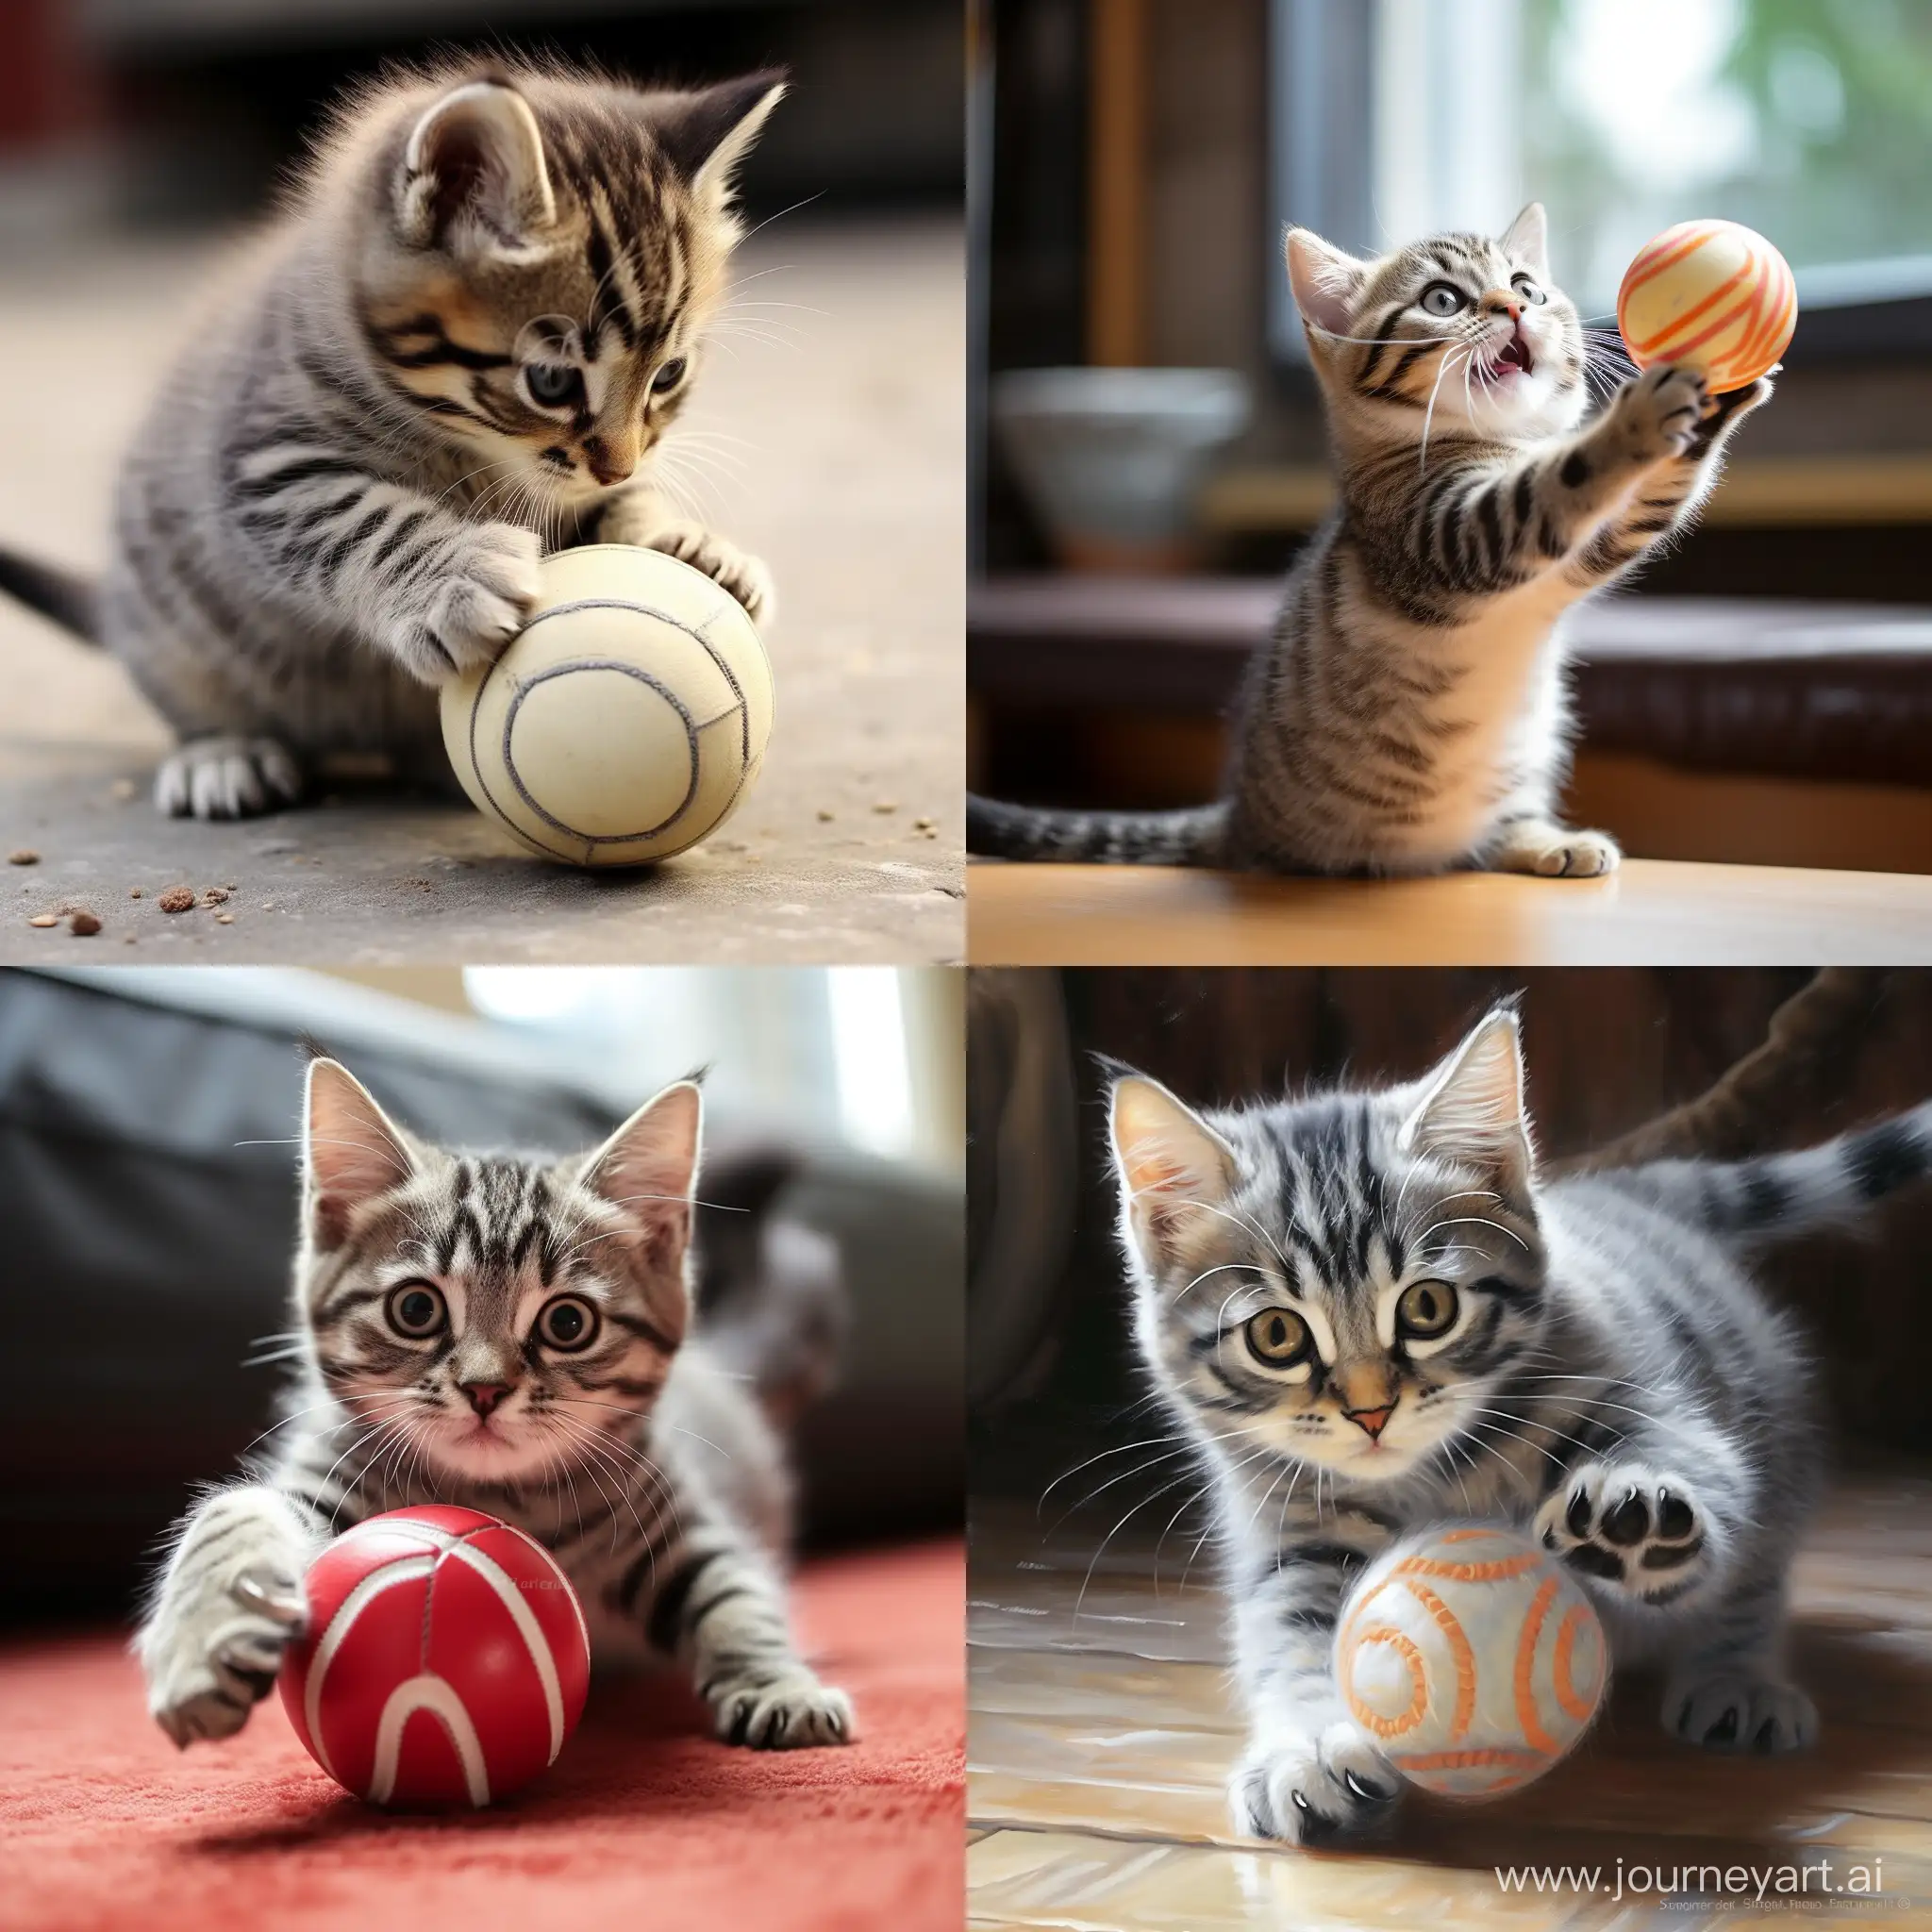 American shorthair cat, a female cat, plays with a ball very cutely